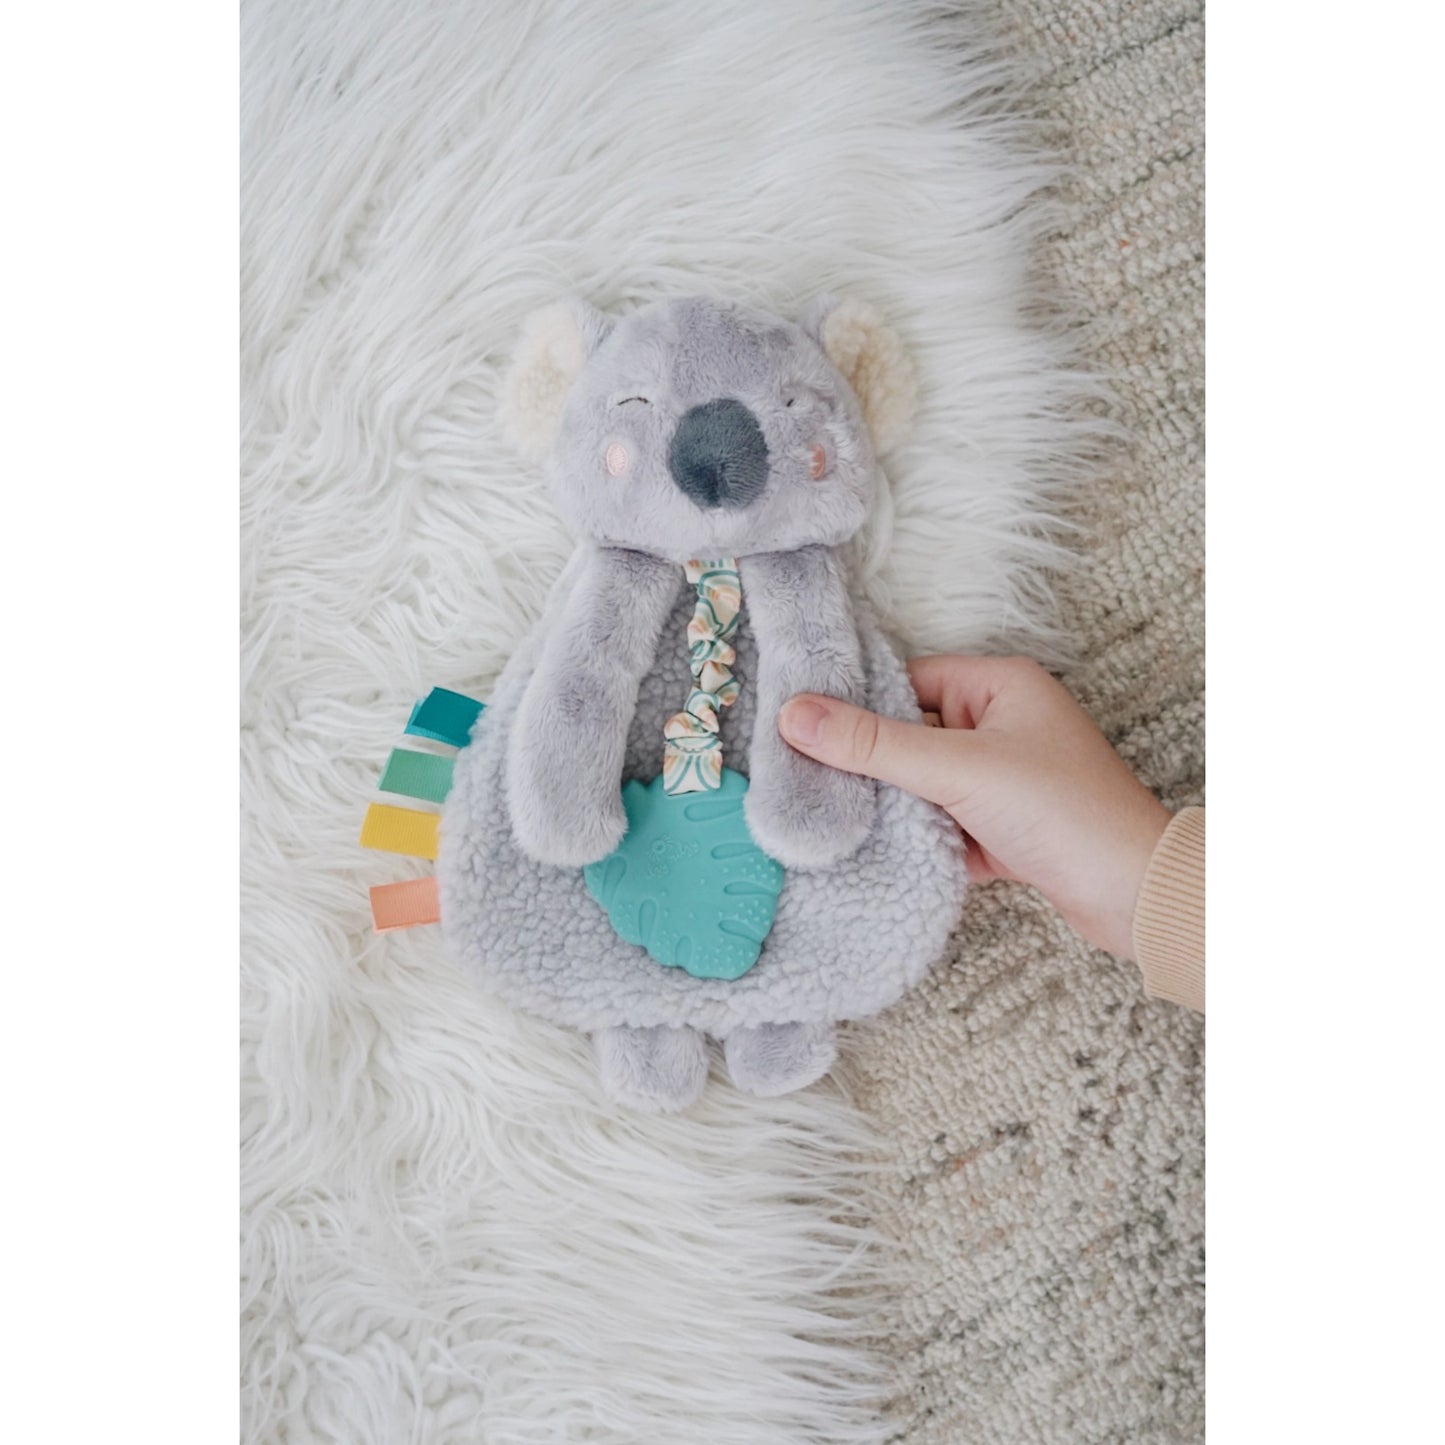 Itzy Friends Lovey Plush with Silicone Teether Toy